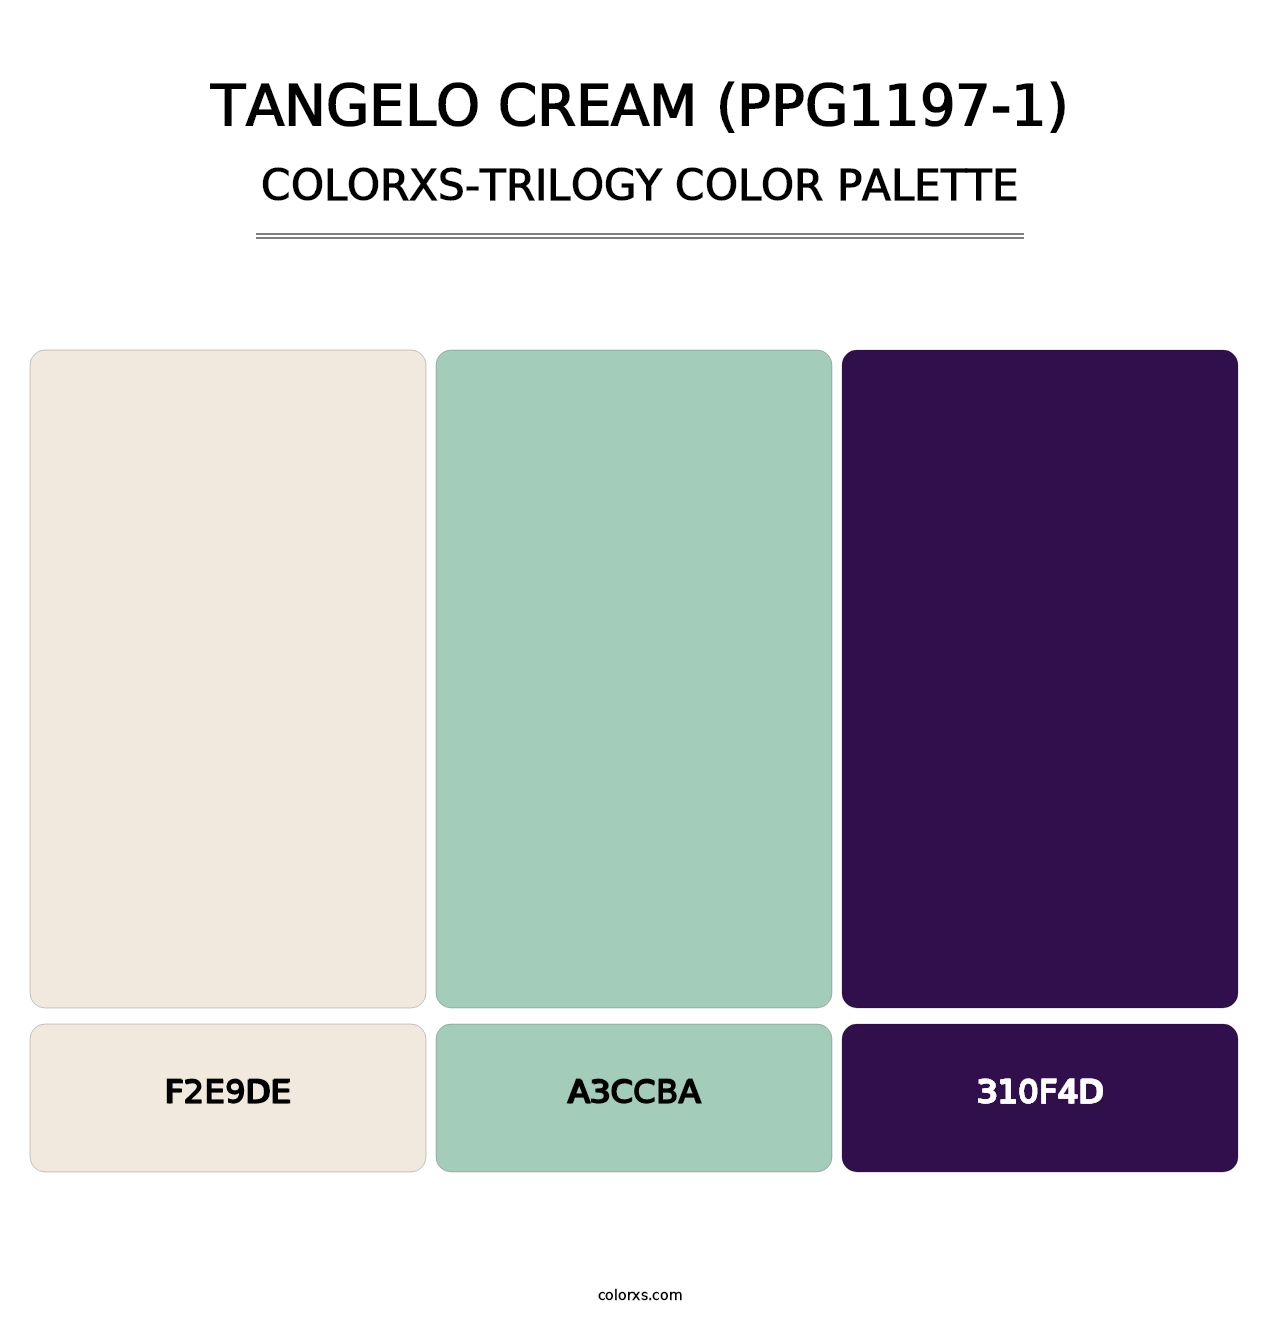 Tangelo Cream (PPG1197-1) - Colorxs Trilogy Palette